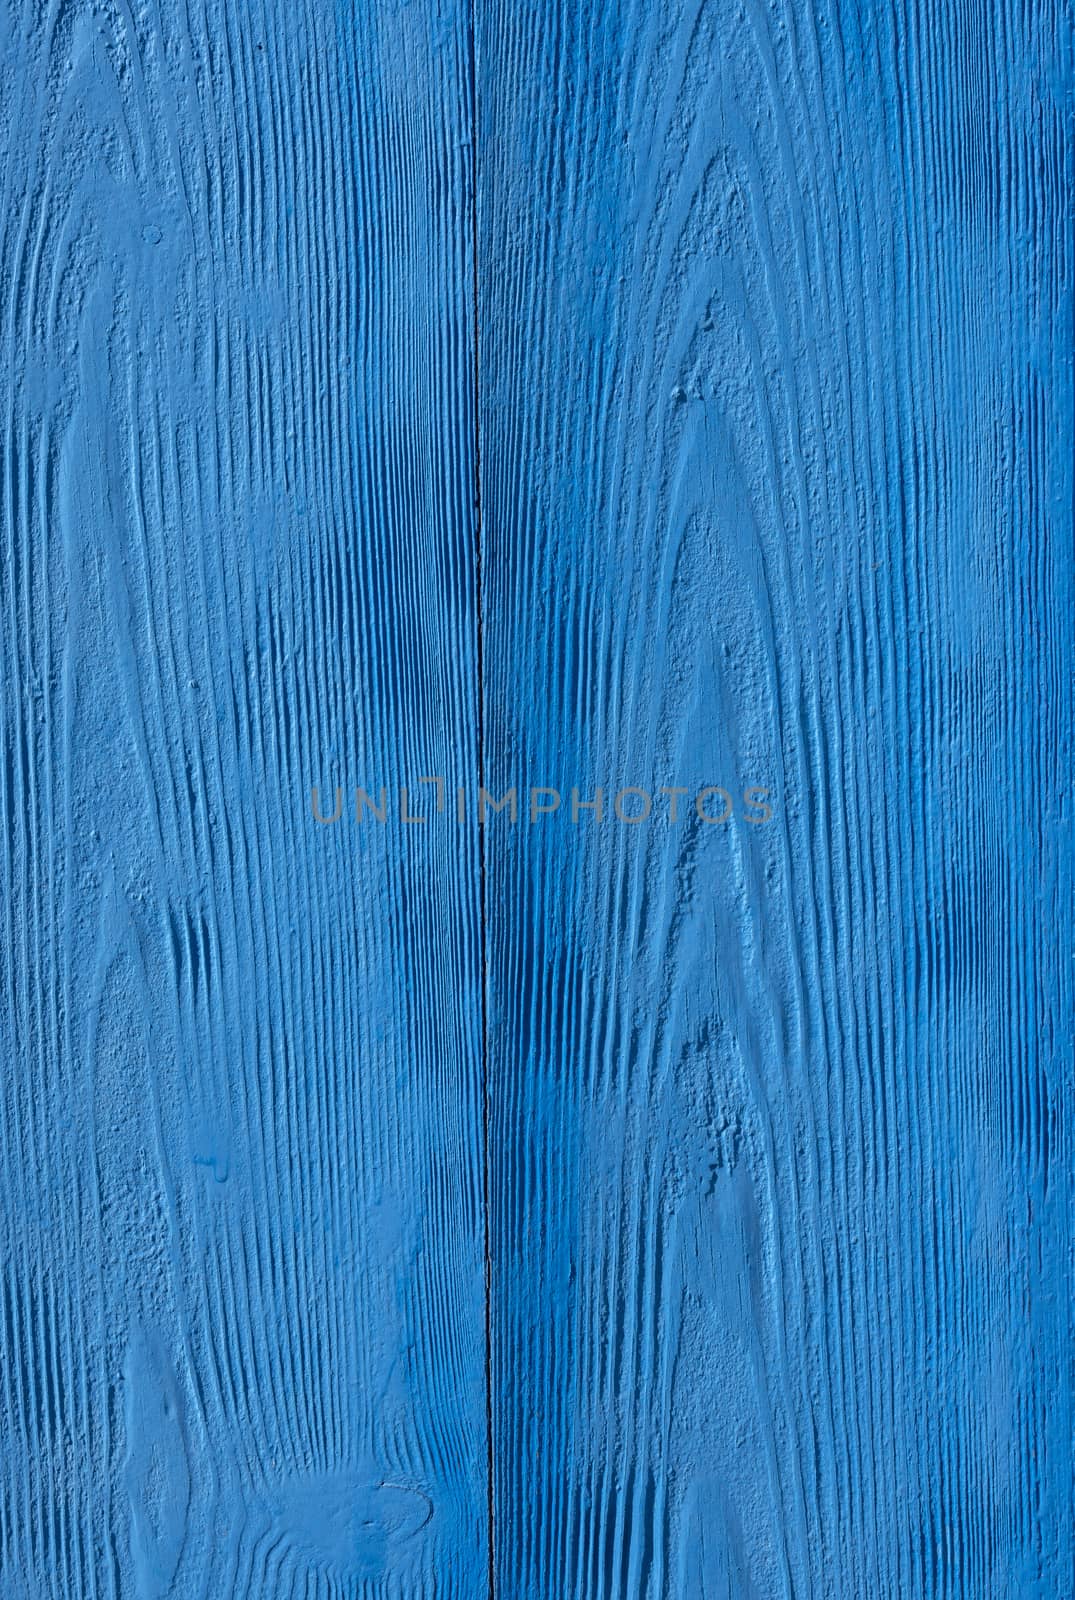 texture of old wood with bright fresh blue paint by ahavelaar